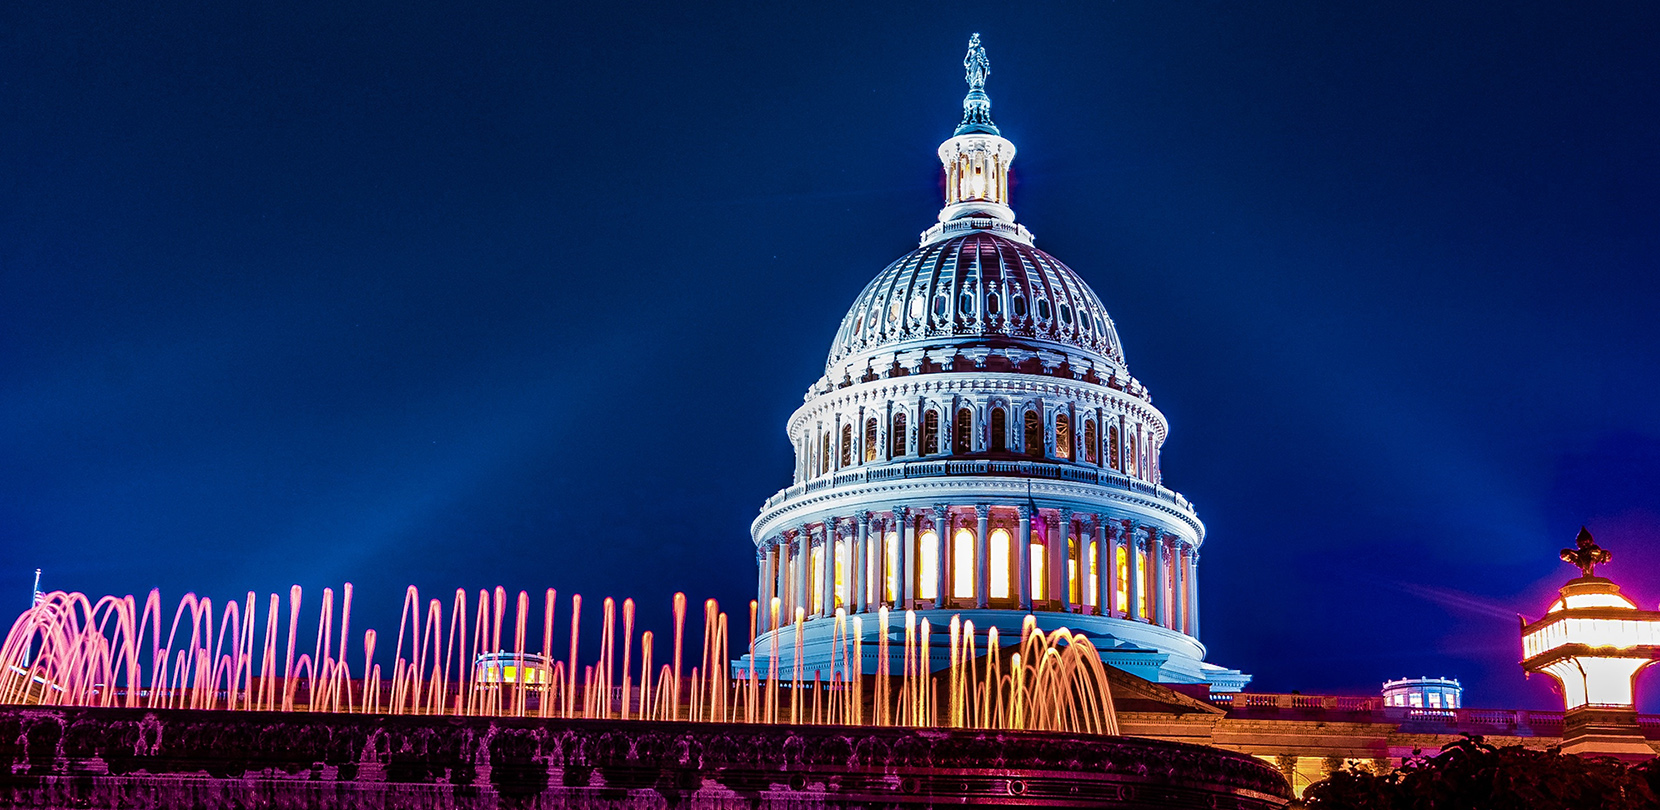 The U.S. capitol building at night